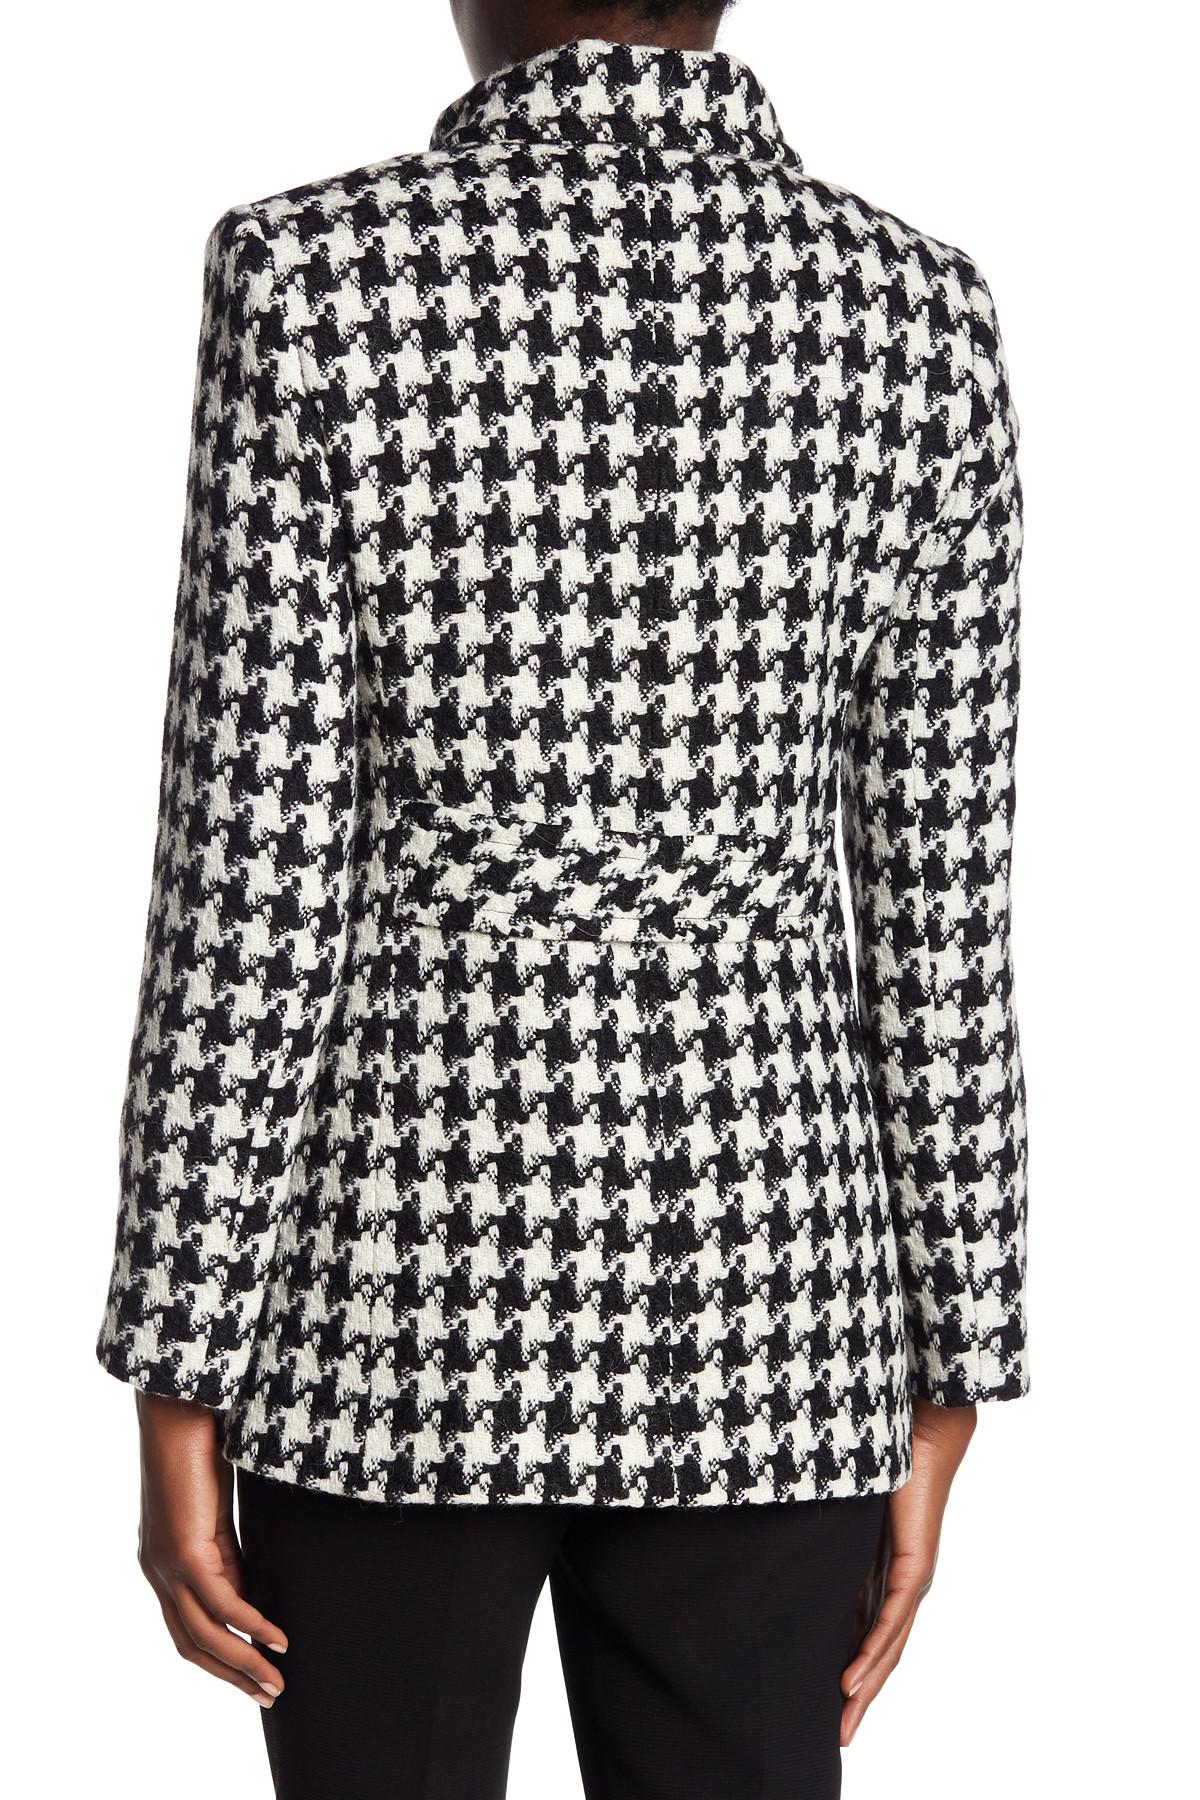 Sofia Cashmere Wool Houndstooth Peacoat in Black | Lyst